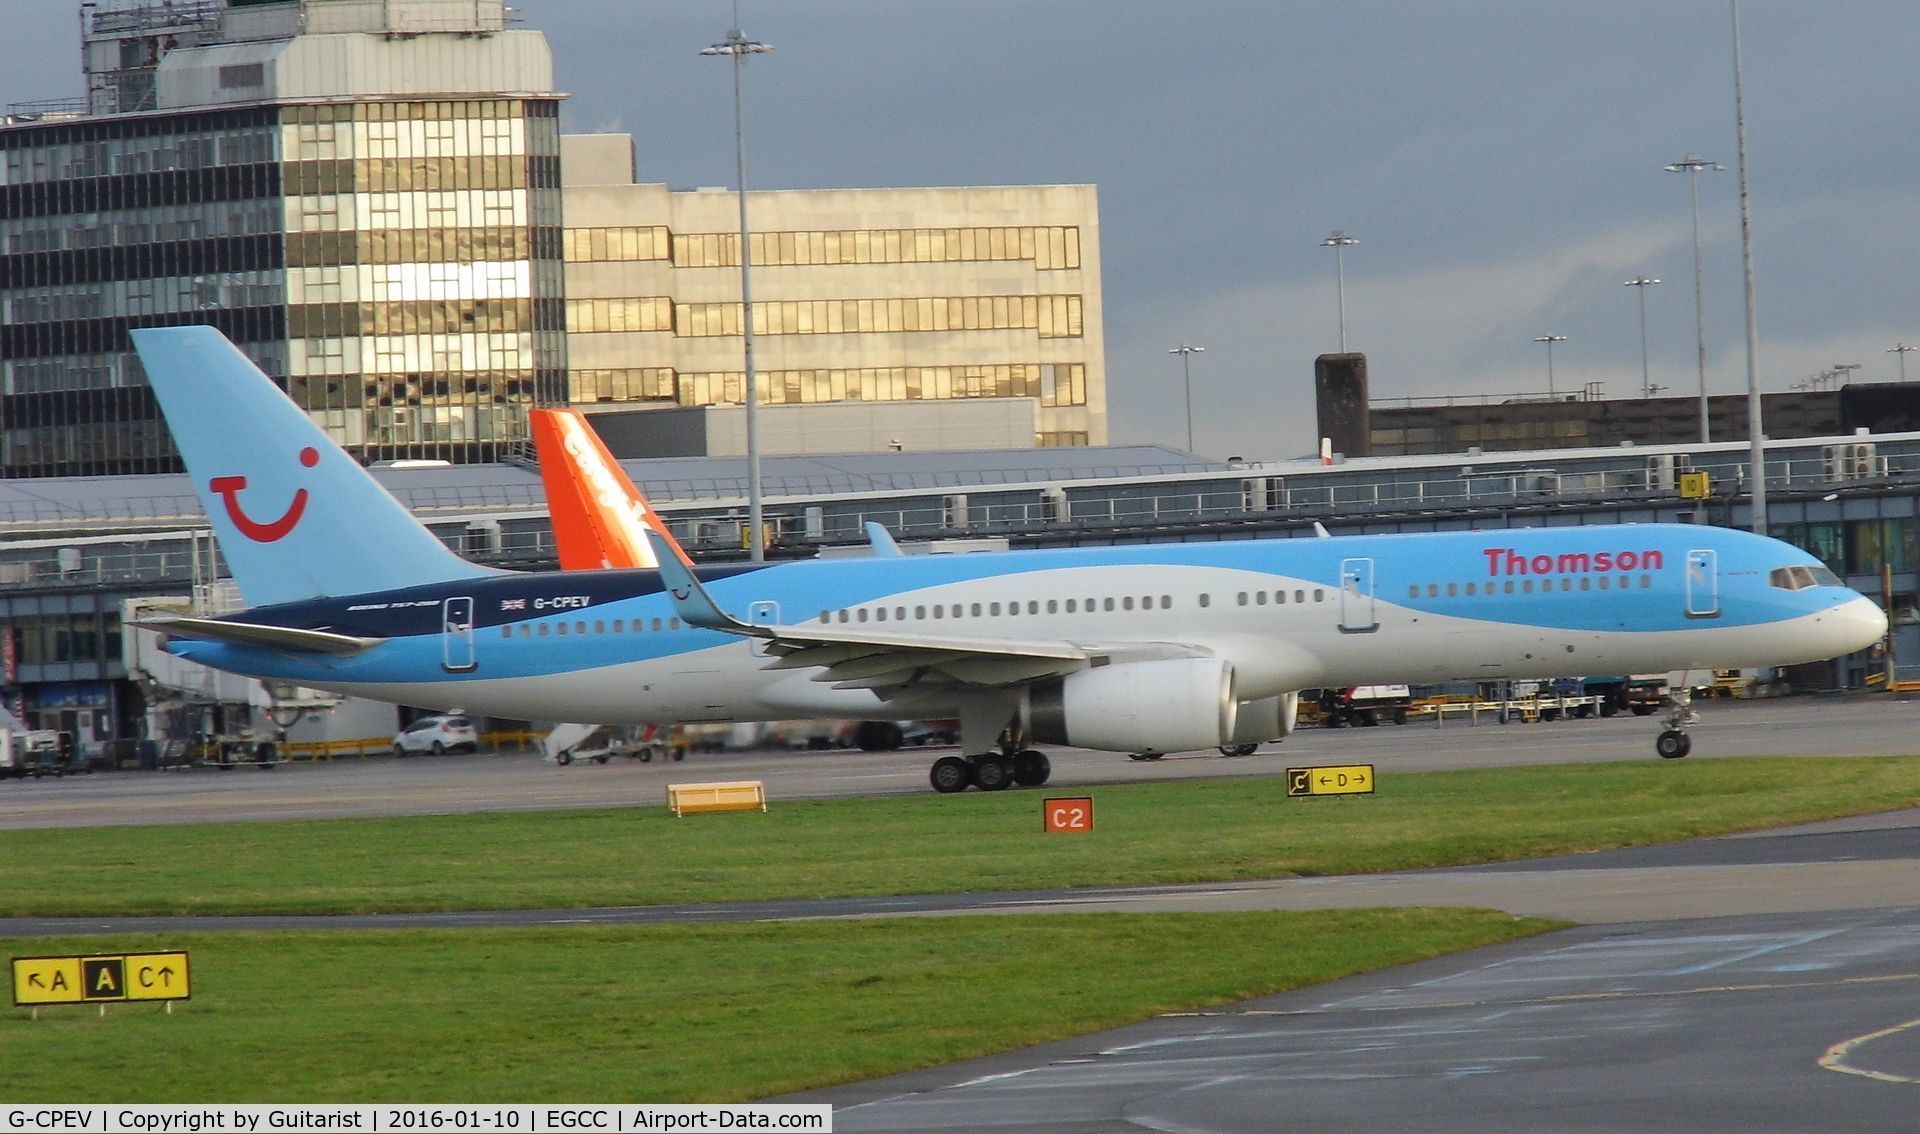 G-CPEV, 1999 Boeing 757-236 C/N 29943, At Manchester